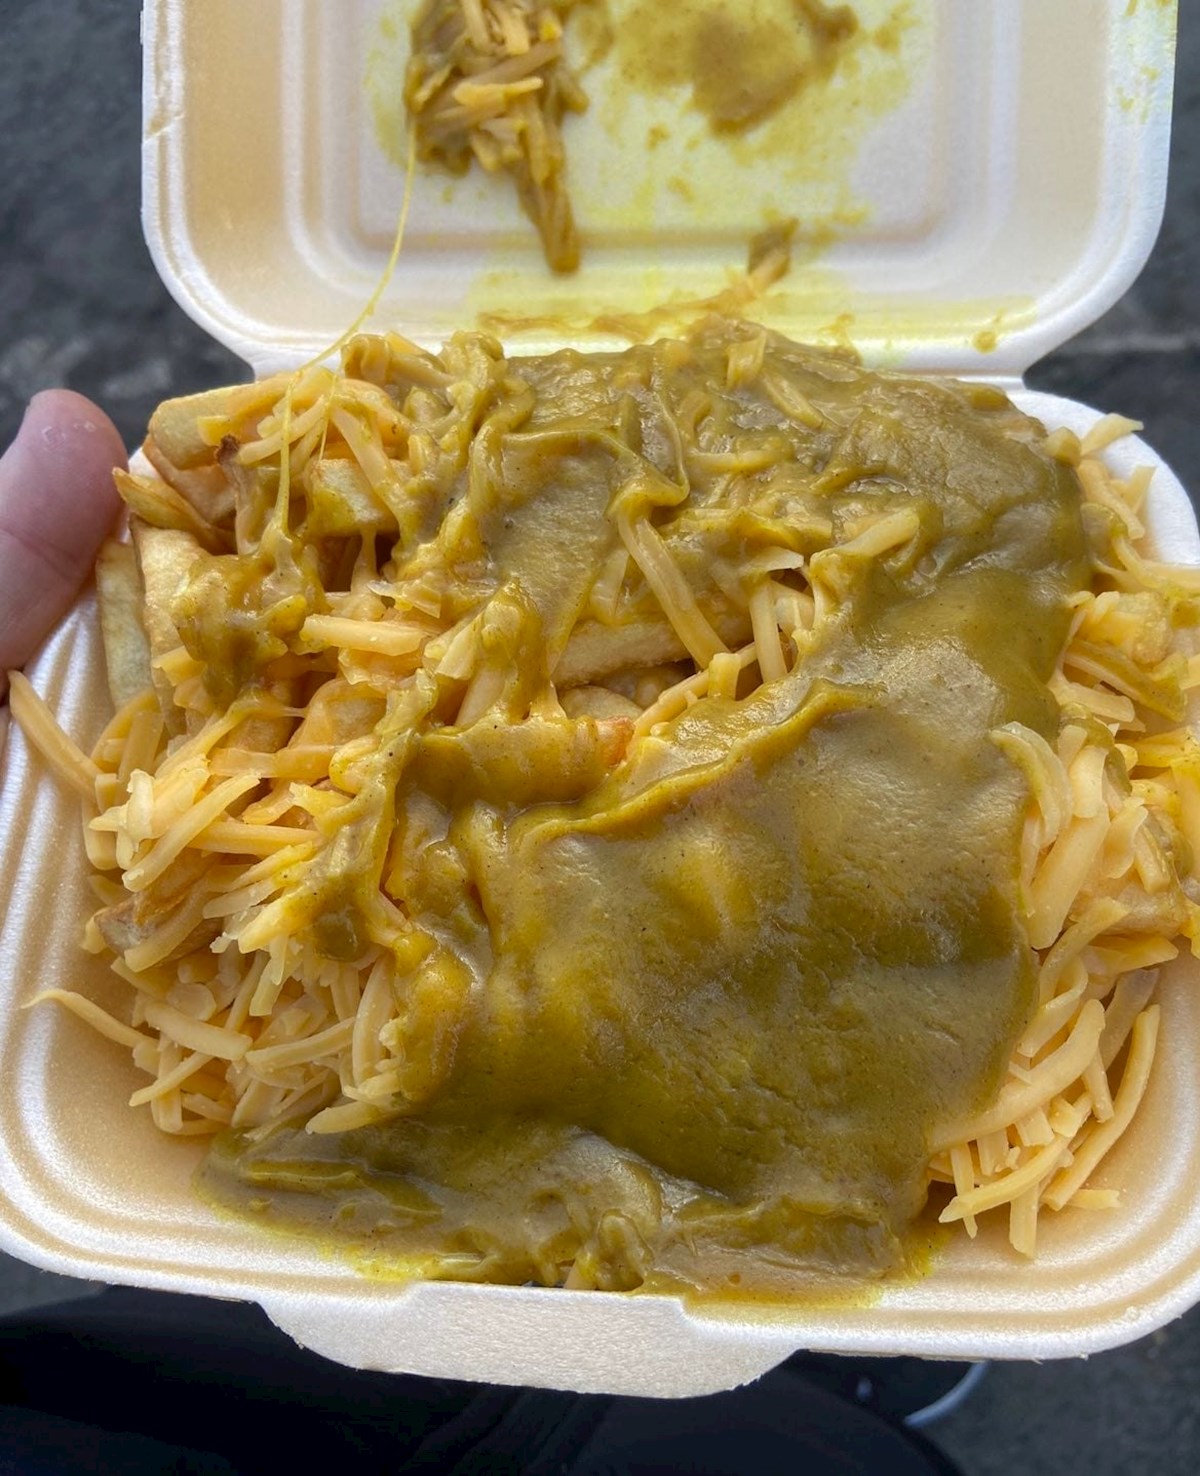 Chips, cheese, and curry sauce